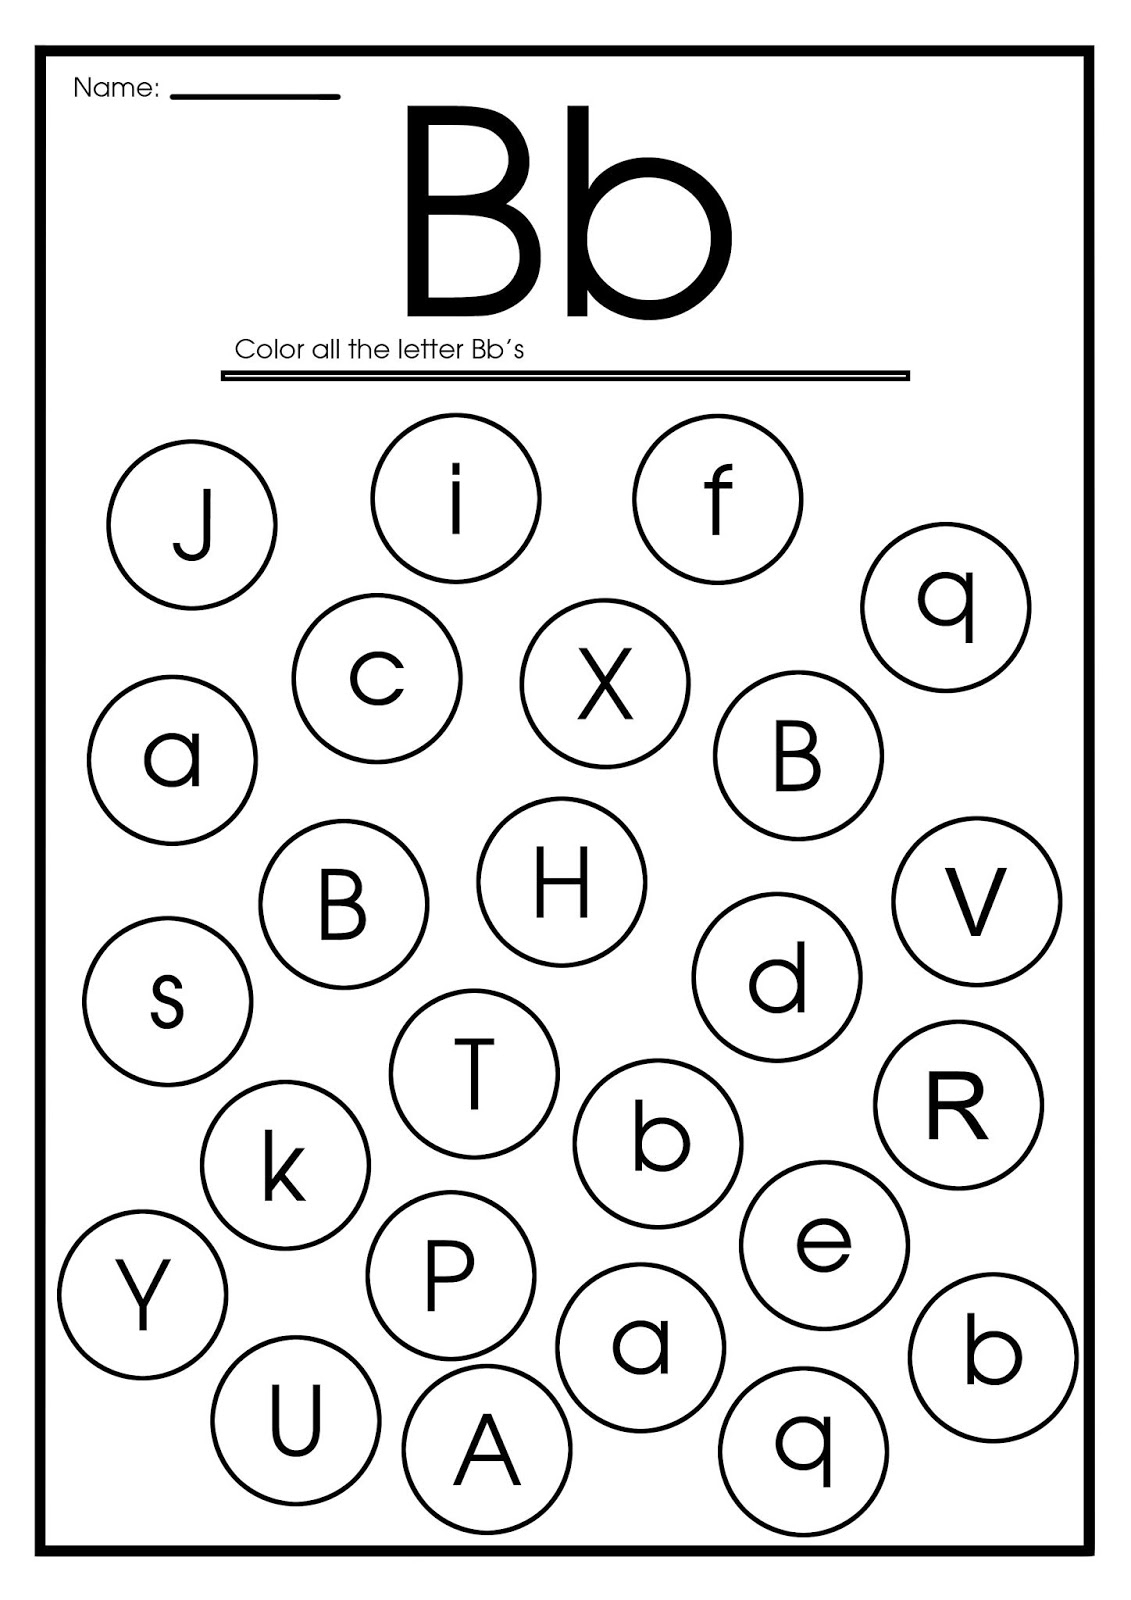 Letter B Worksheets, Flash Cards, Coloring Pages throughout Letter Worksheets B